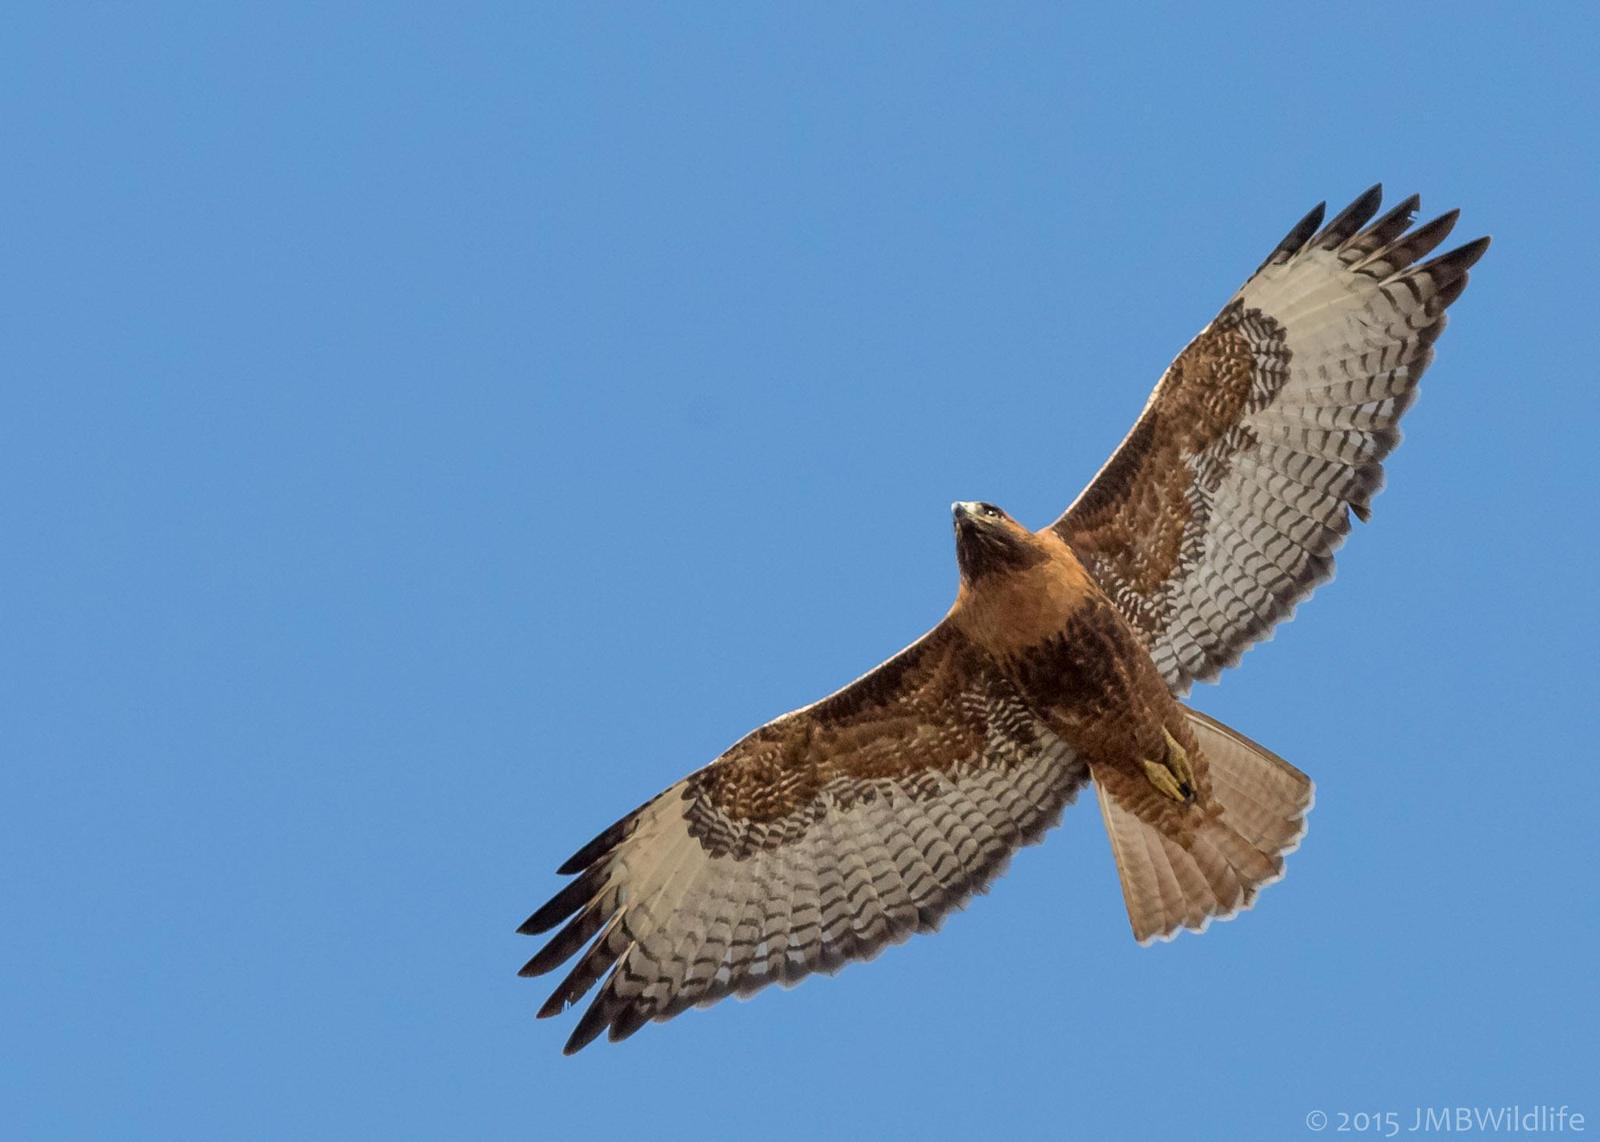 Red-tailed Hawk (calurus/alascensis) Photo by Jeff Bray